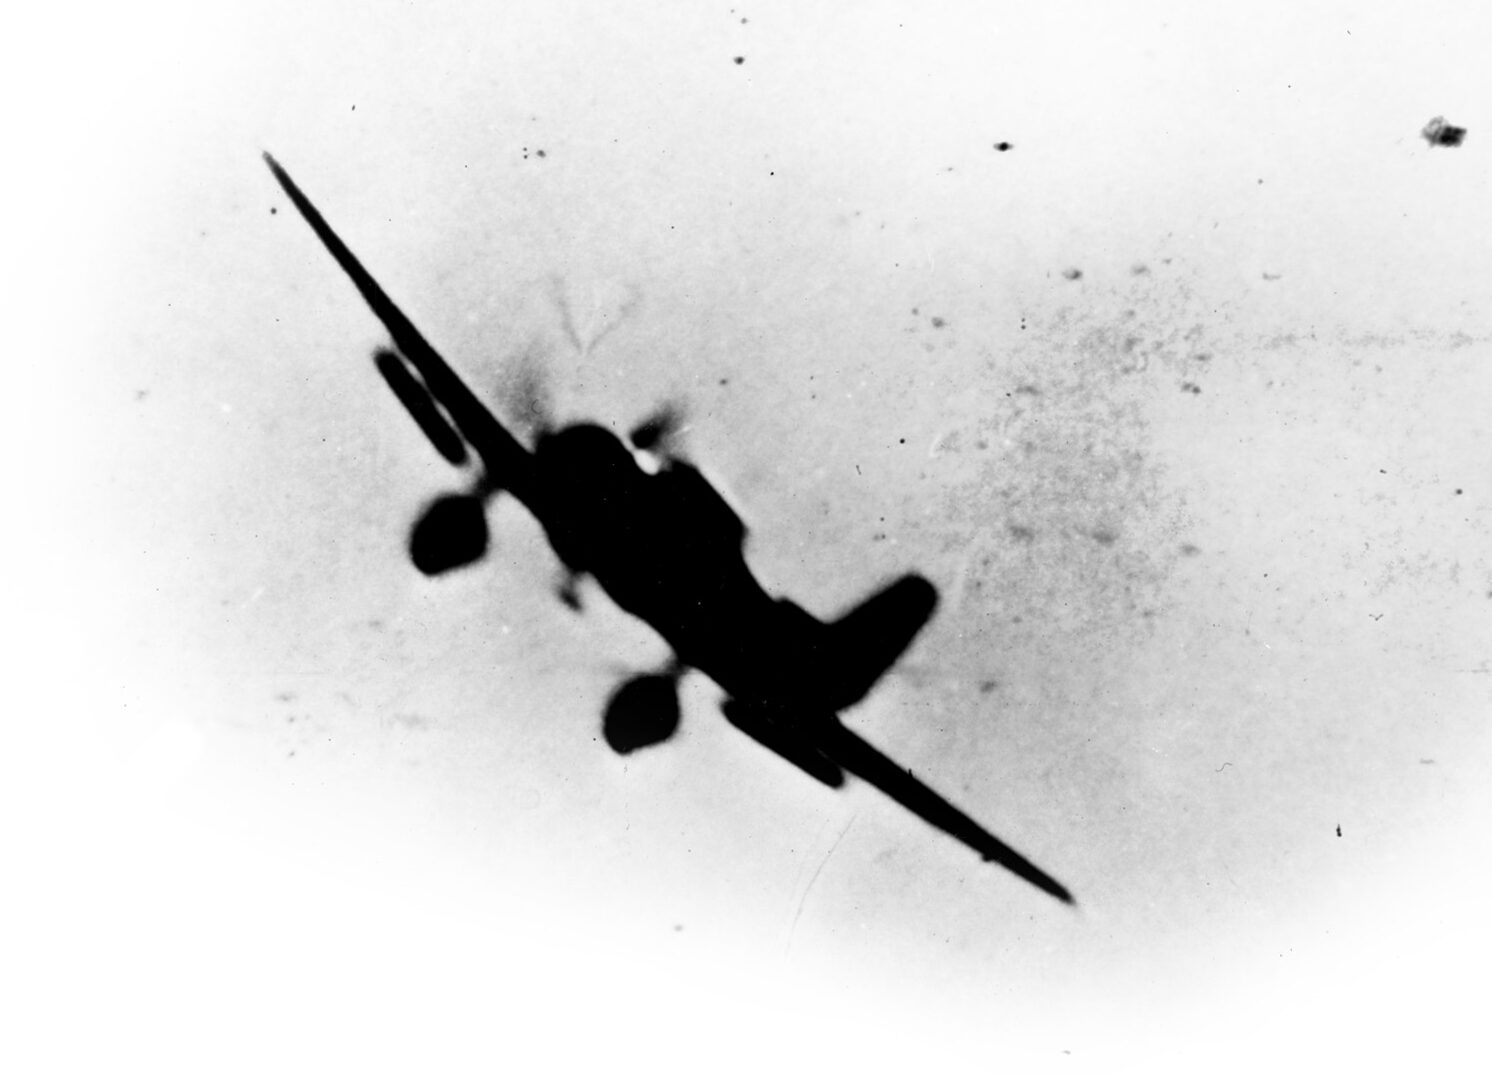 A Japanese Aichi D3 Type 99 Val during the attack.